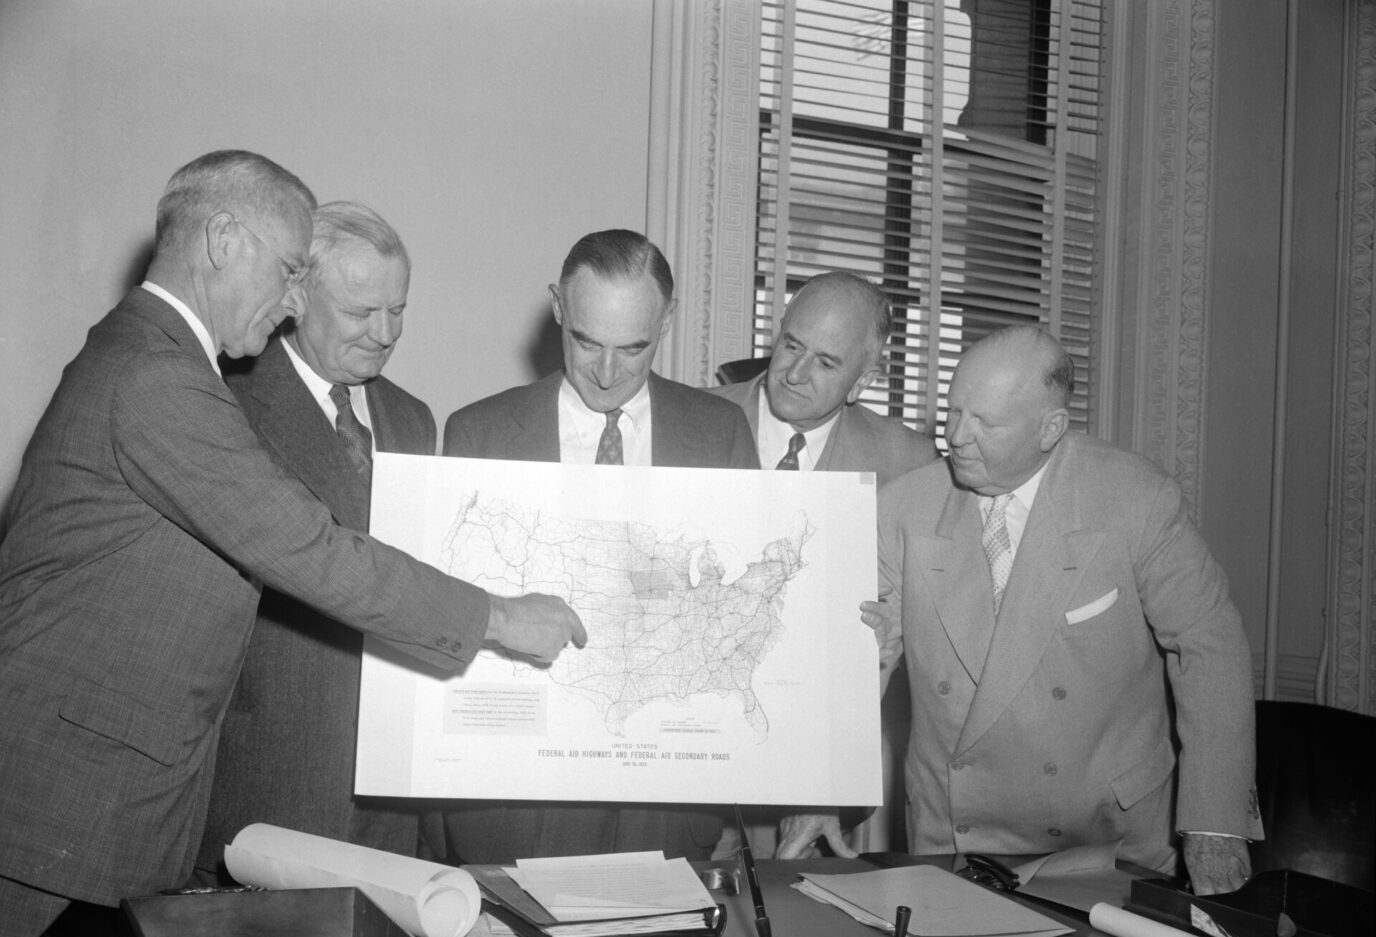 Members of a presidential committee began a conference yesterday with business and industrial leaders to map plans for carrying out President Eisenhower's 10-year, 50 billion dollar highway construction program. Looking over a chart (from left): S. Sloan Colt, president of Bankers Trust Company of New York; William A. Roberts, president of Allis Chalmers Company, of Milwaukee, Wisconsin; General Lucius D. Clay, chairman of the president's committee on the National Highway Program; Stephen Bechtel, president of the Bechtel Corporation of San Francisco; and David Beck, president of the International Brotherhood of Teamsters in Seattle, Washington.